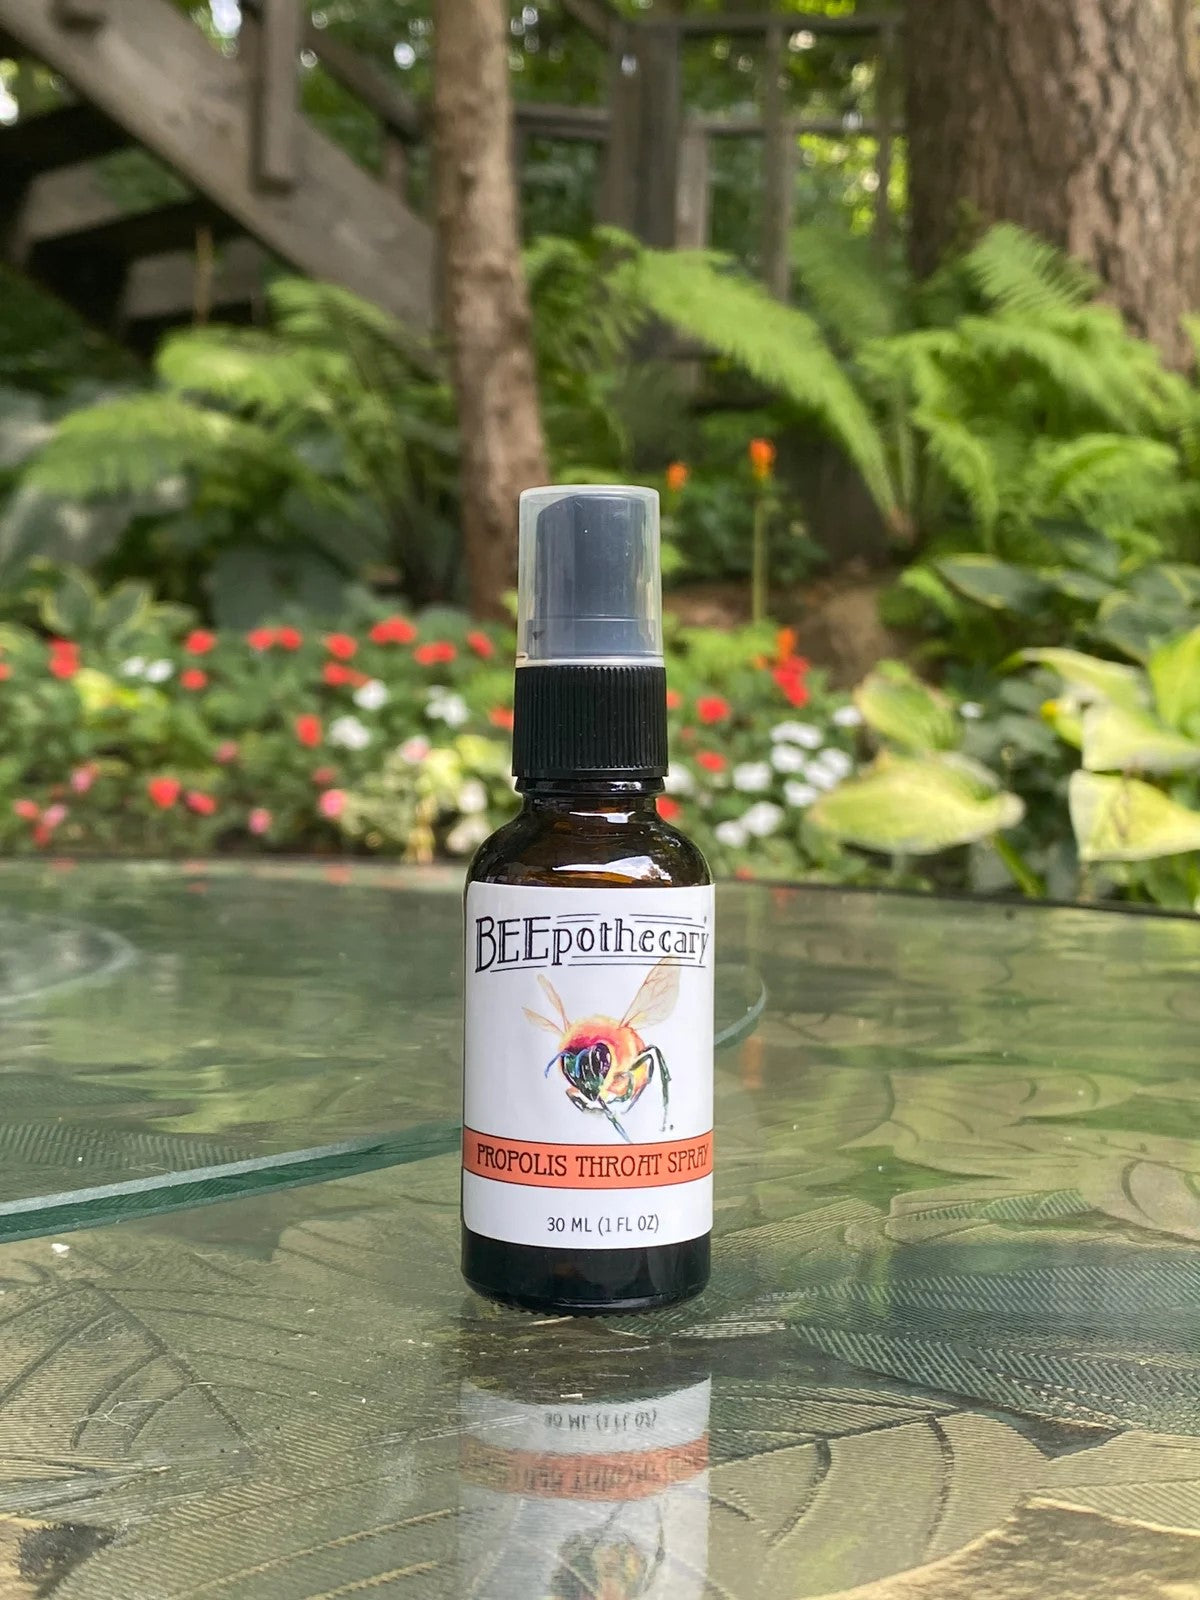 BEEpothecary Propolis Throat Spray in 30 ml brown spray bottle with white label.